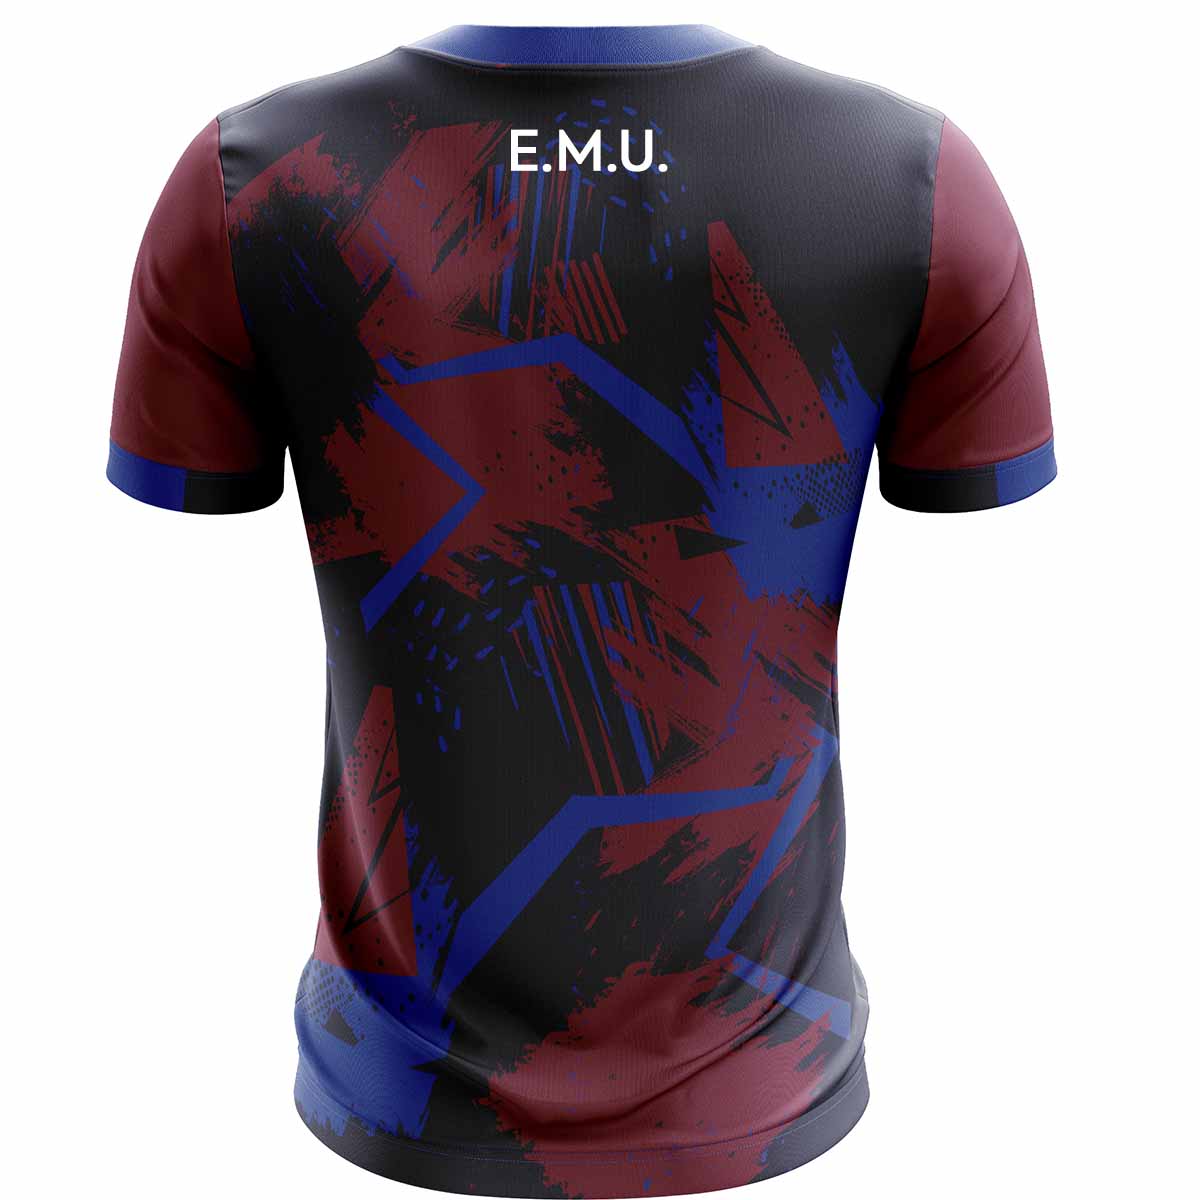 Mc Keever East Meath United FC Training Jersey - Youth - Navy/Maroon/Blue